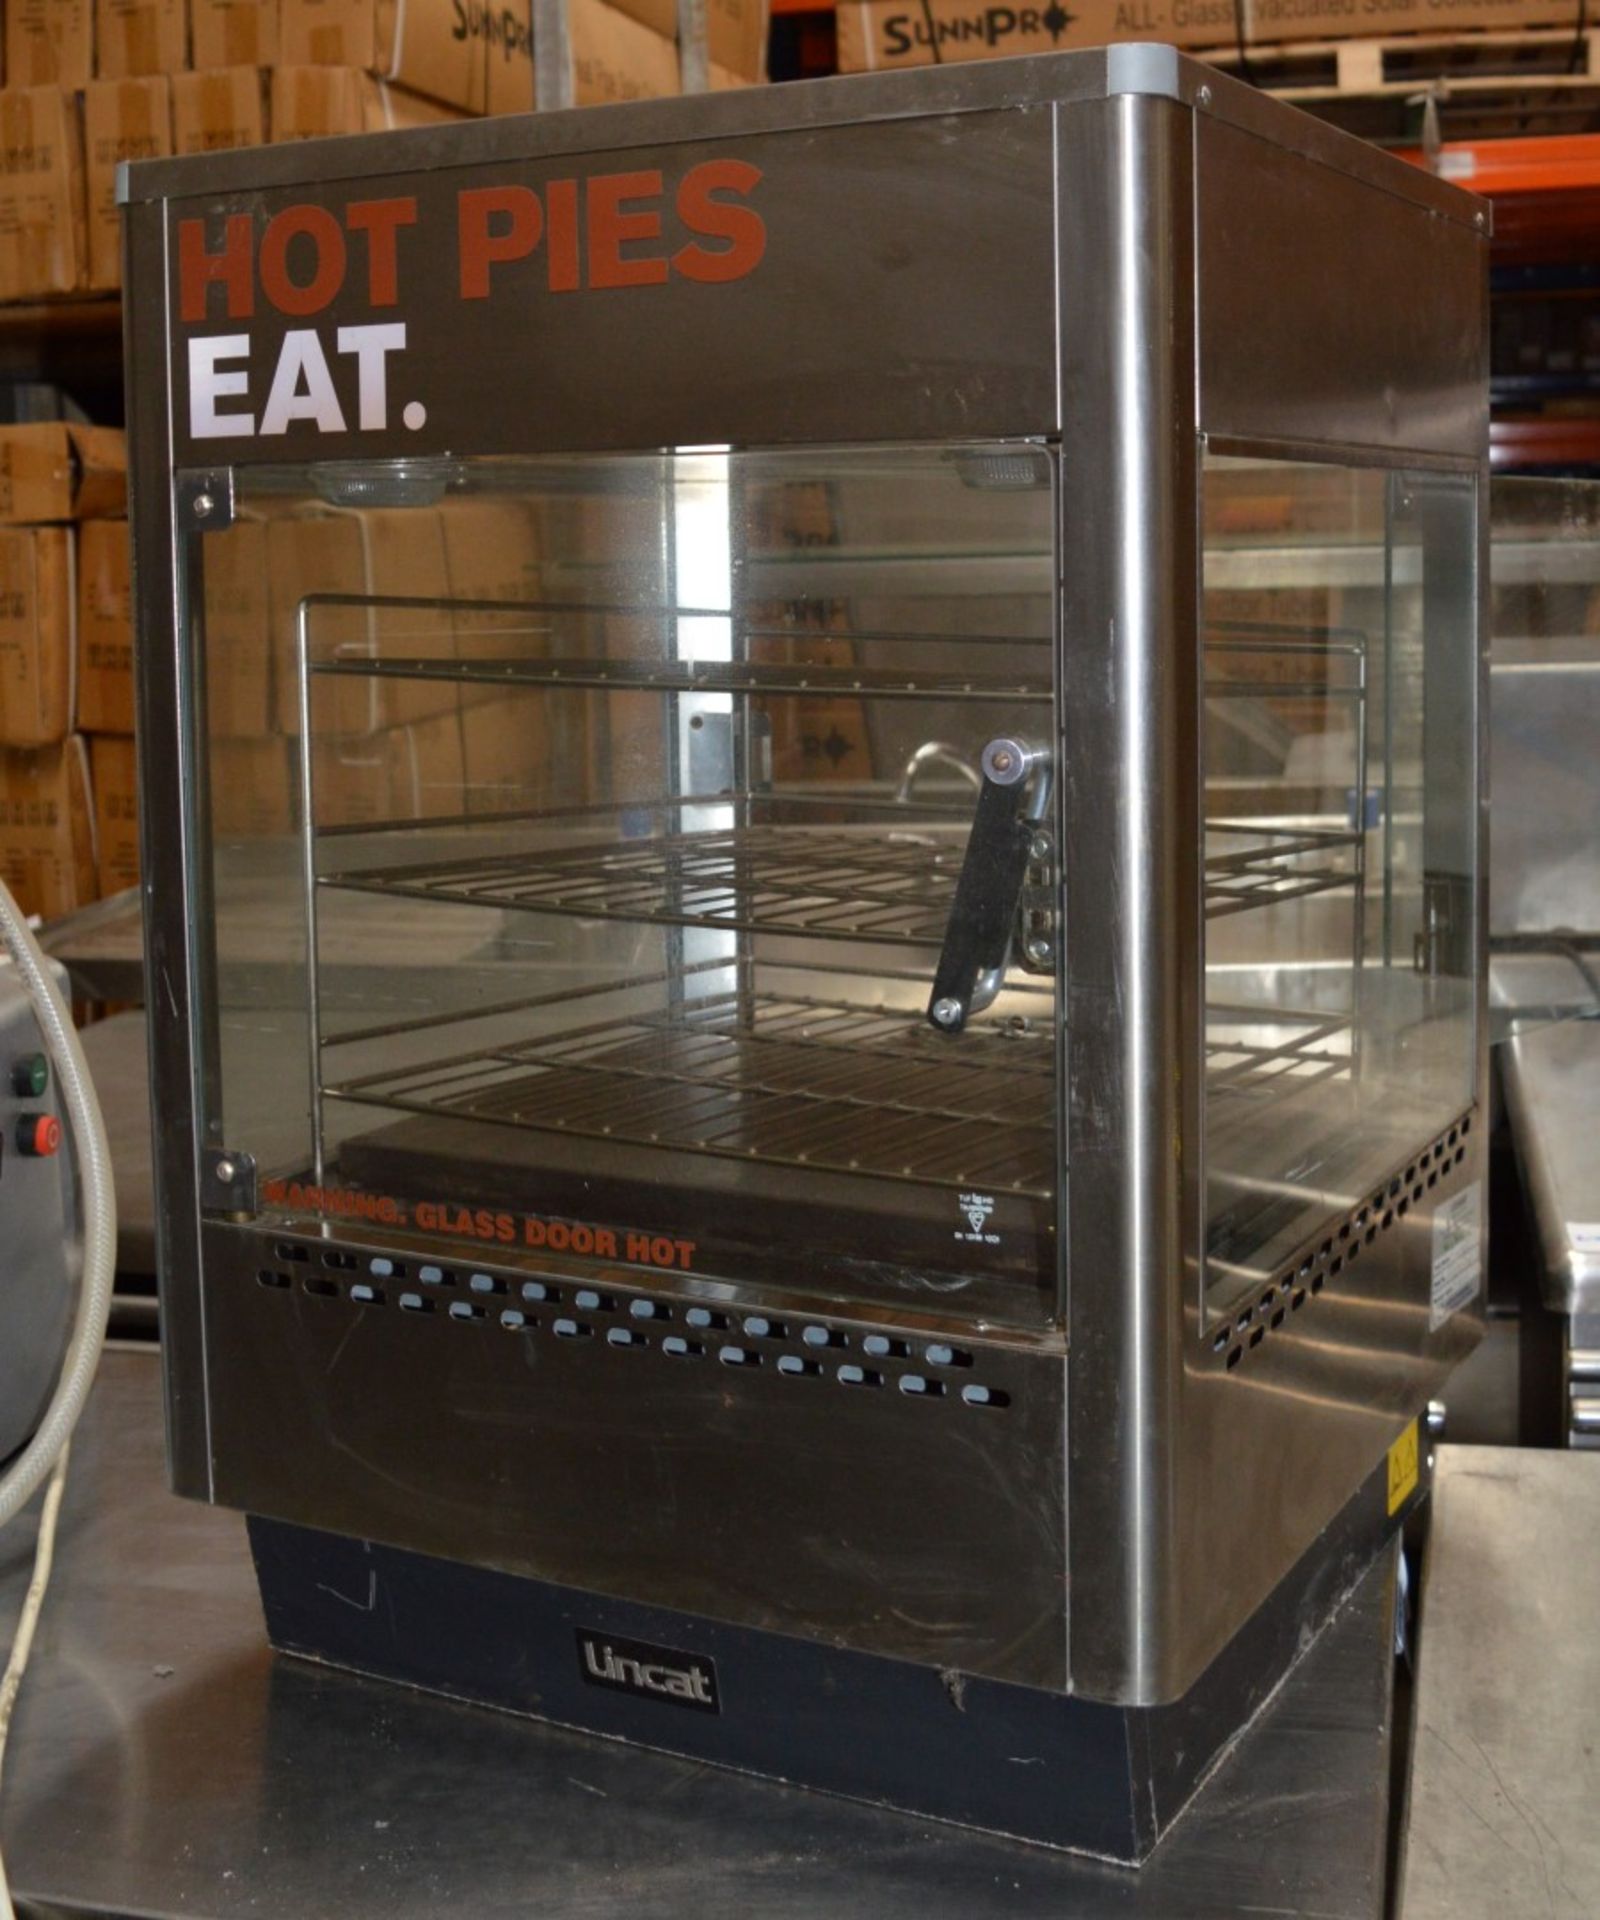 1 x Lincat Upright Heated Display Cabinet Suitable For Hot Pies or Pastries - Model UM50D - 240v - - Image 2 of 6